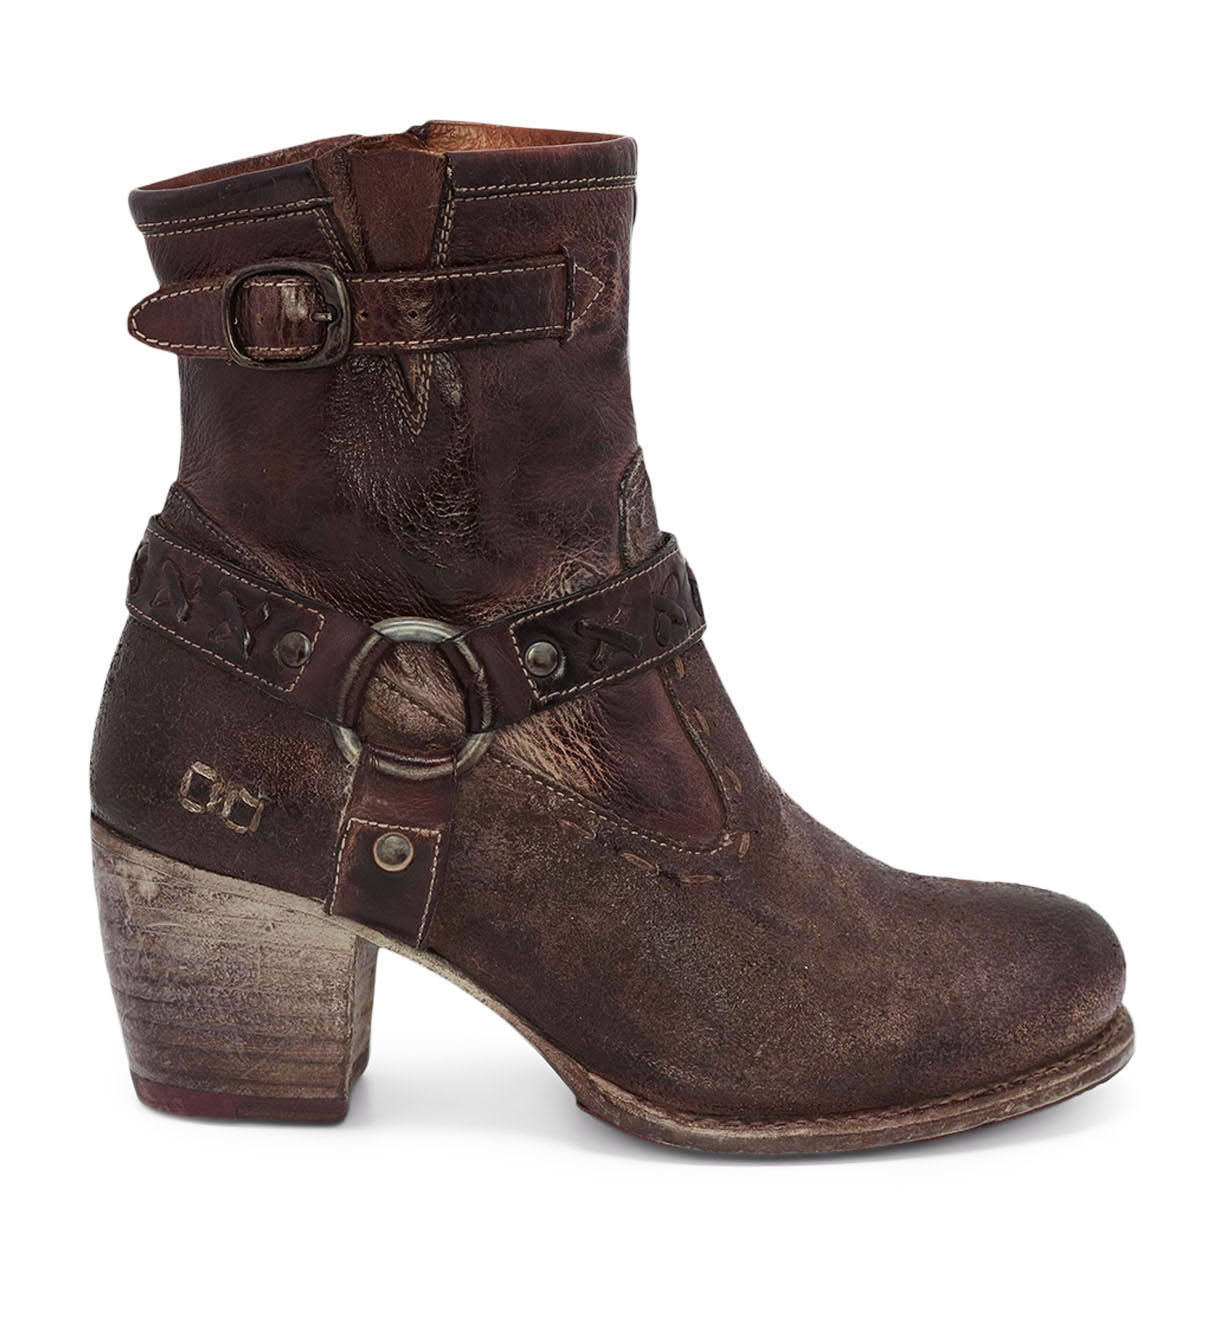 A women's brown ankle boot with buckles named Octane II by Bed Stu.